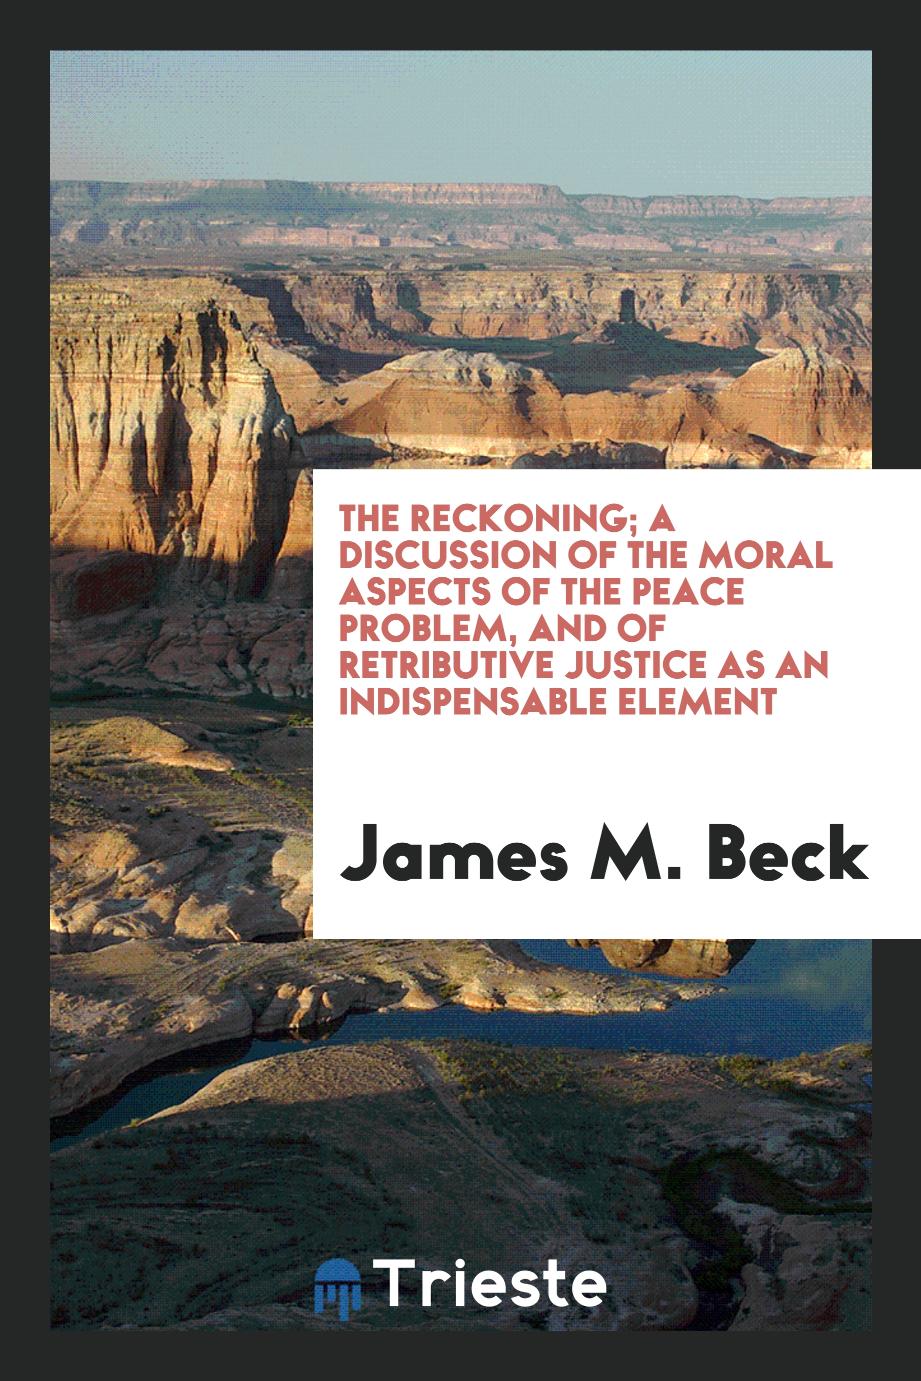 The reckoning; a discussion of the moral aspects of the peace problem, and of retributive justice as an indispensable element